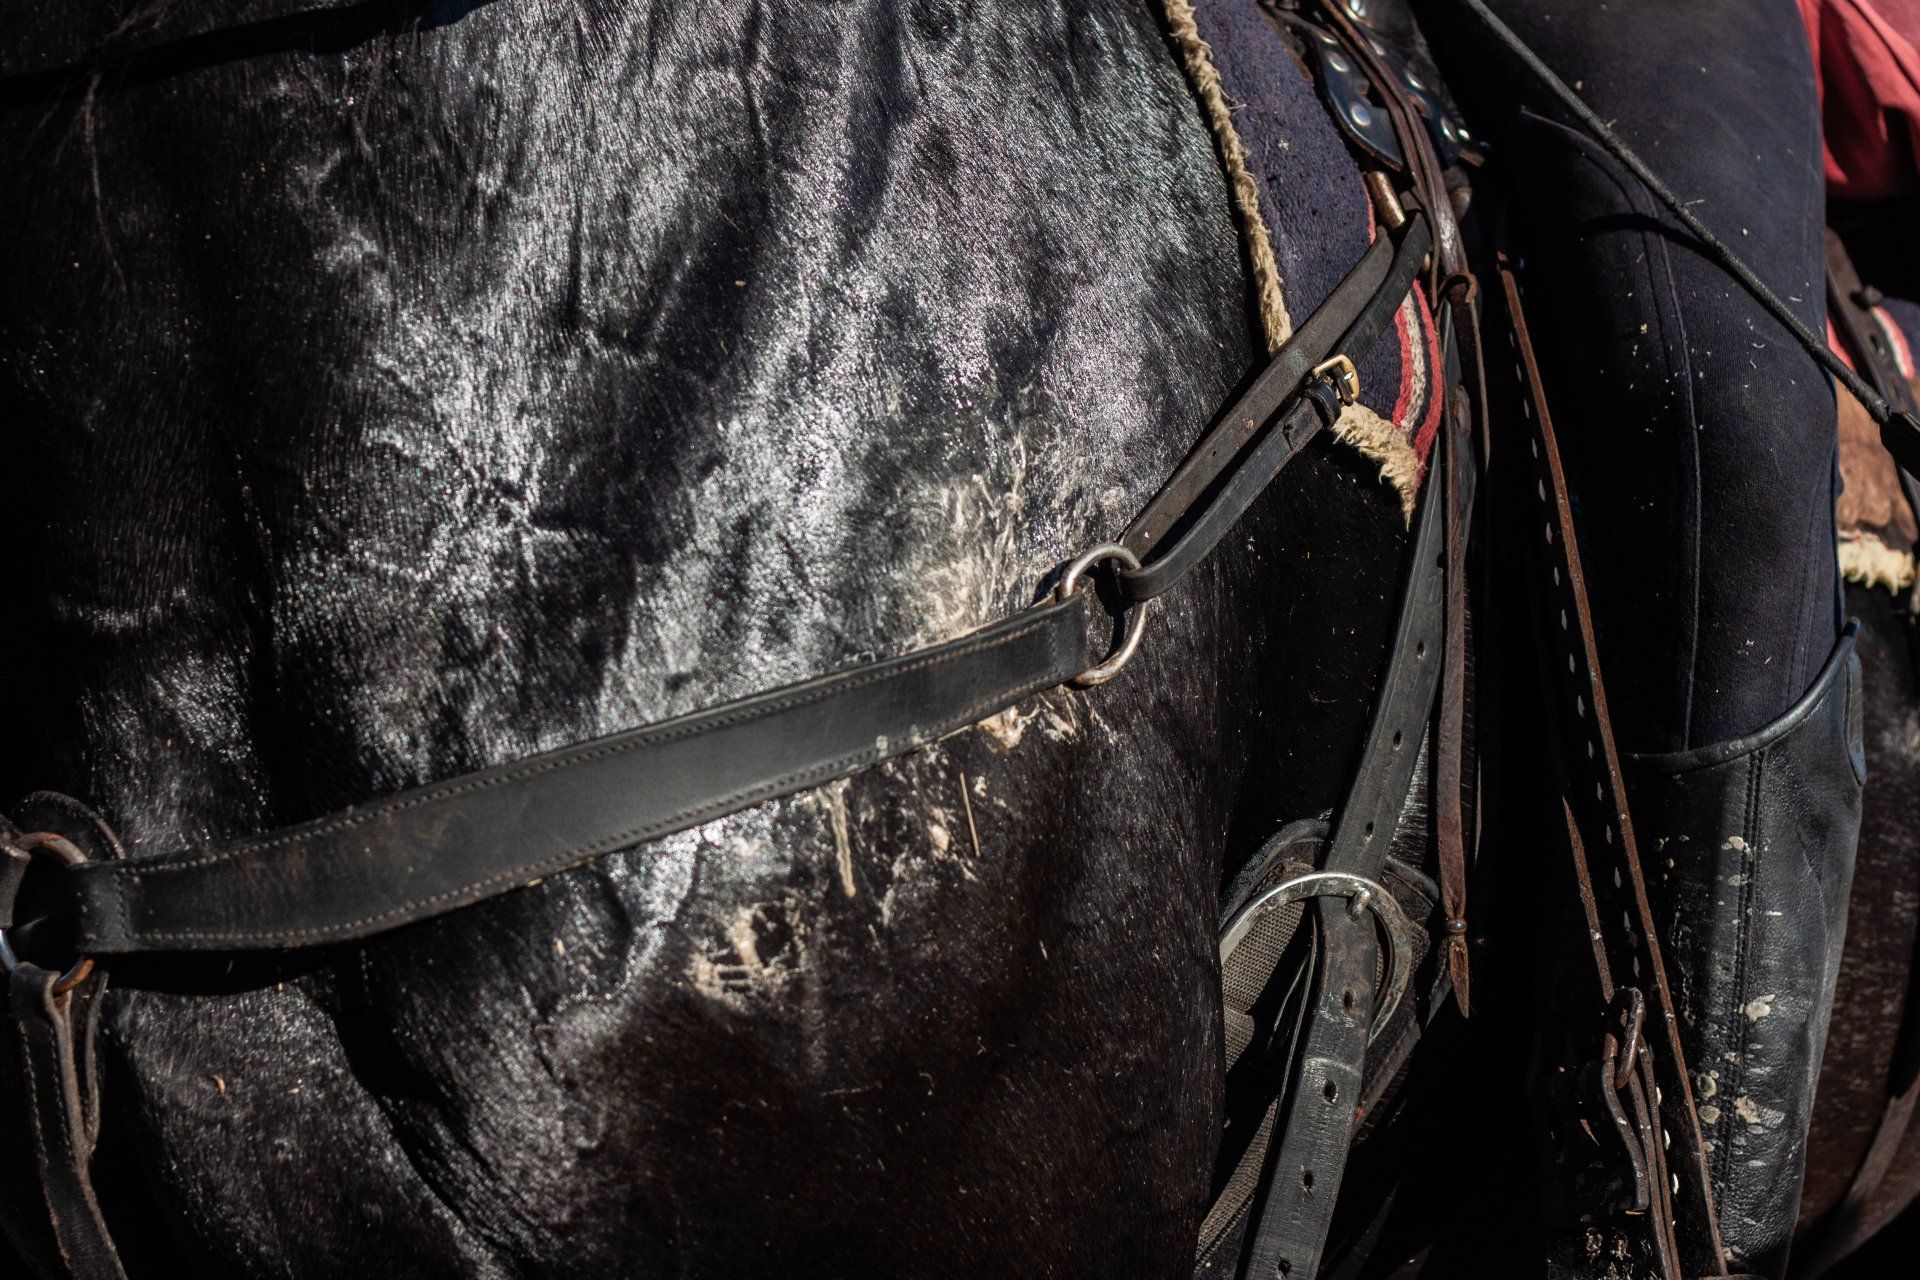 10 equine cooling tips – And how to handle horse anhidrosis